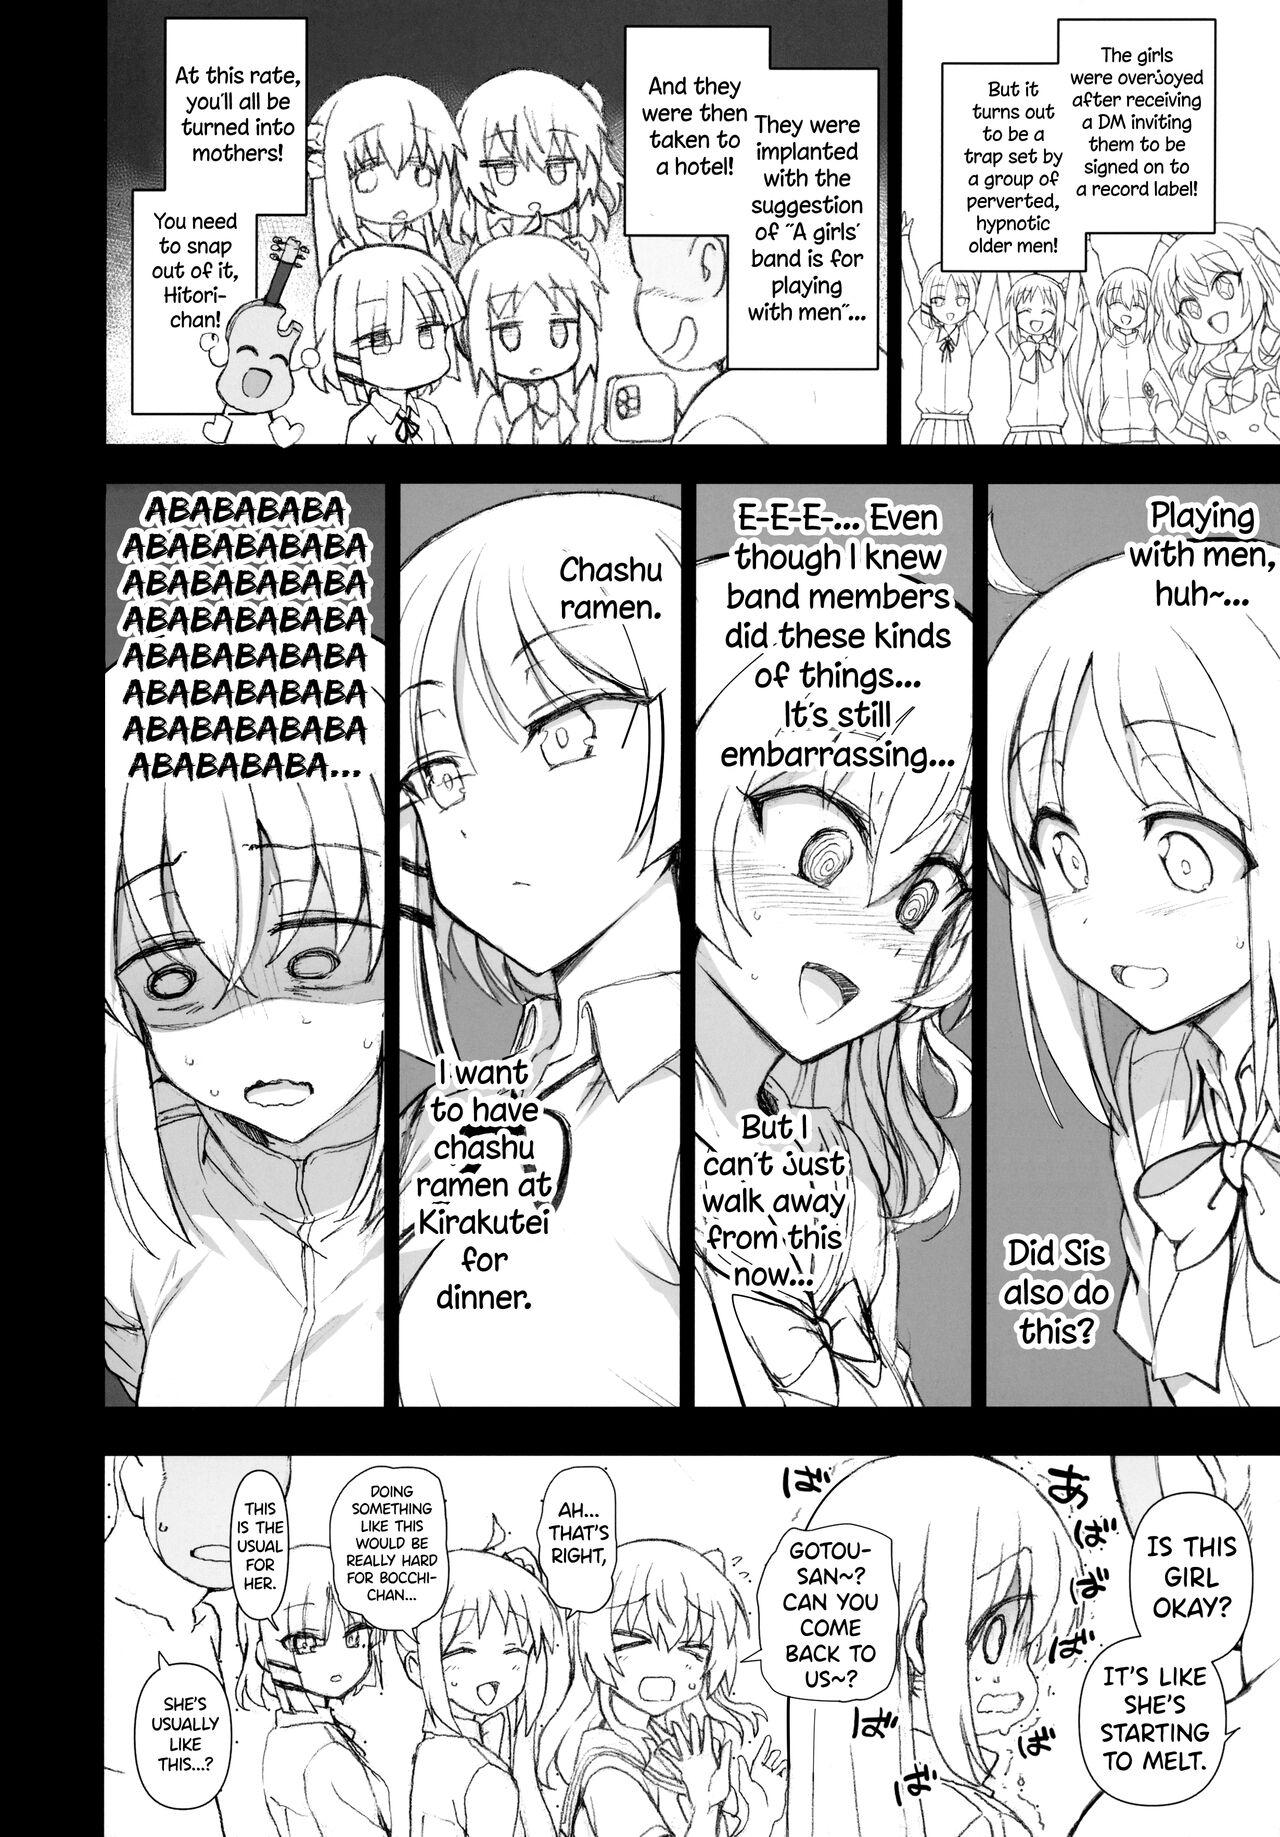 Sharing Dakuon 5 - Bocchi the rock Oldyoung - Page 3